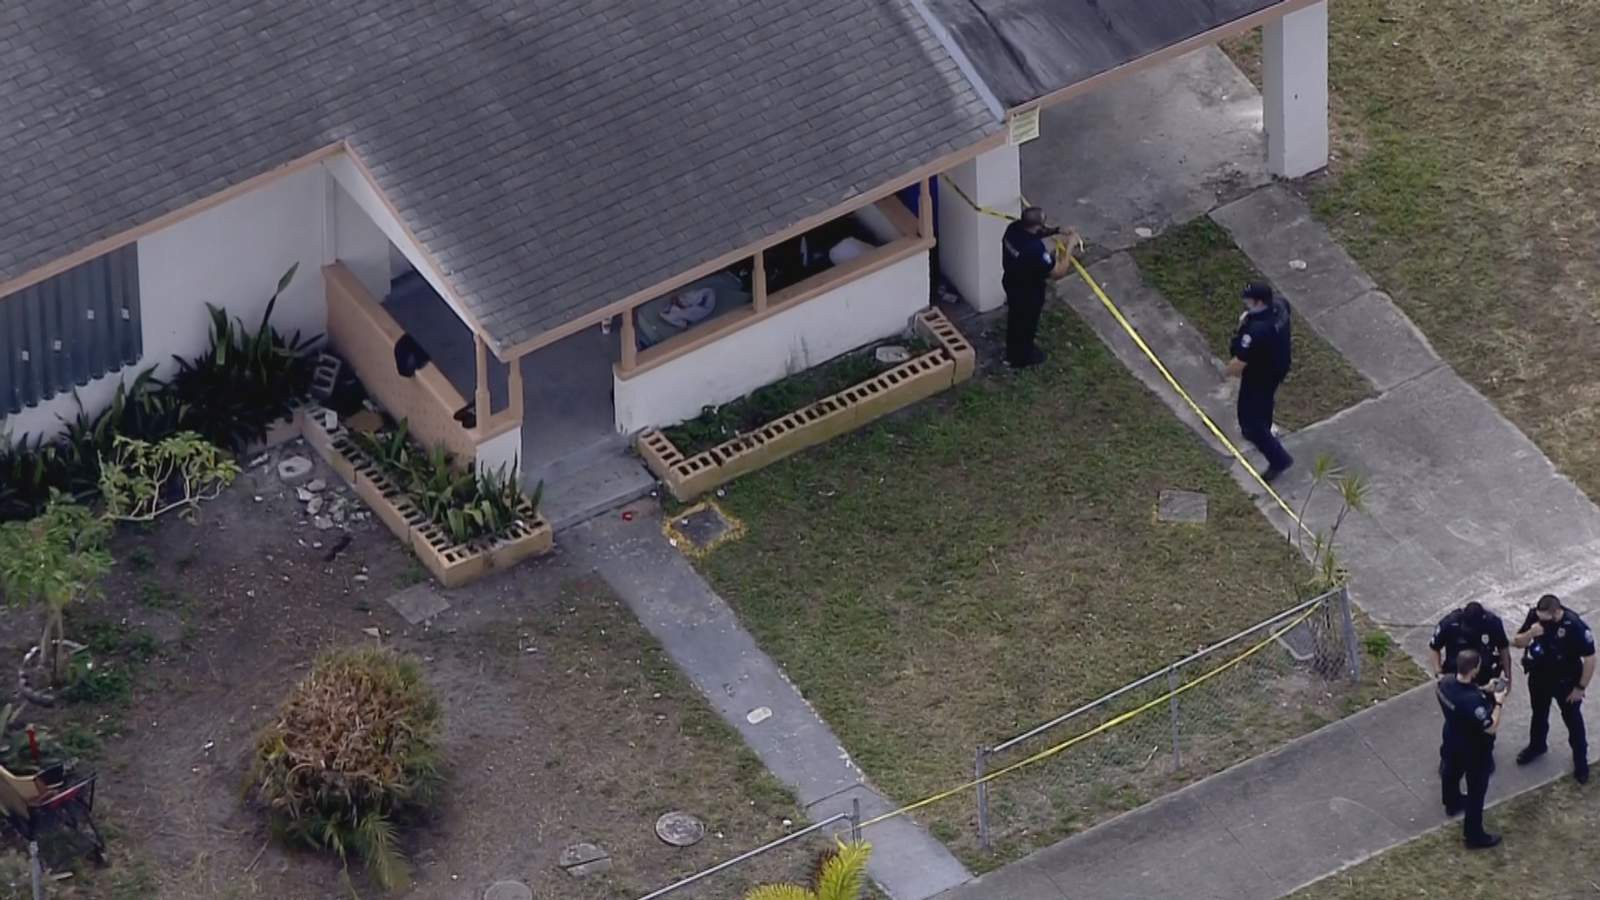 Police investigate after man found dead inside Hollywood home